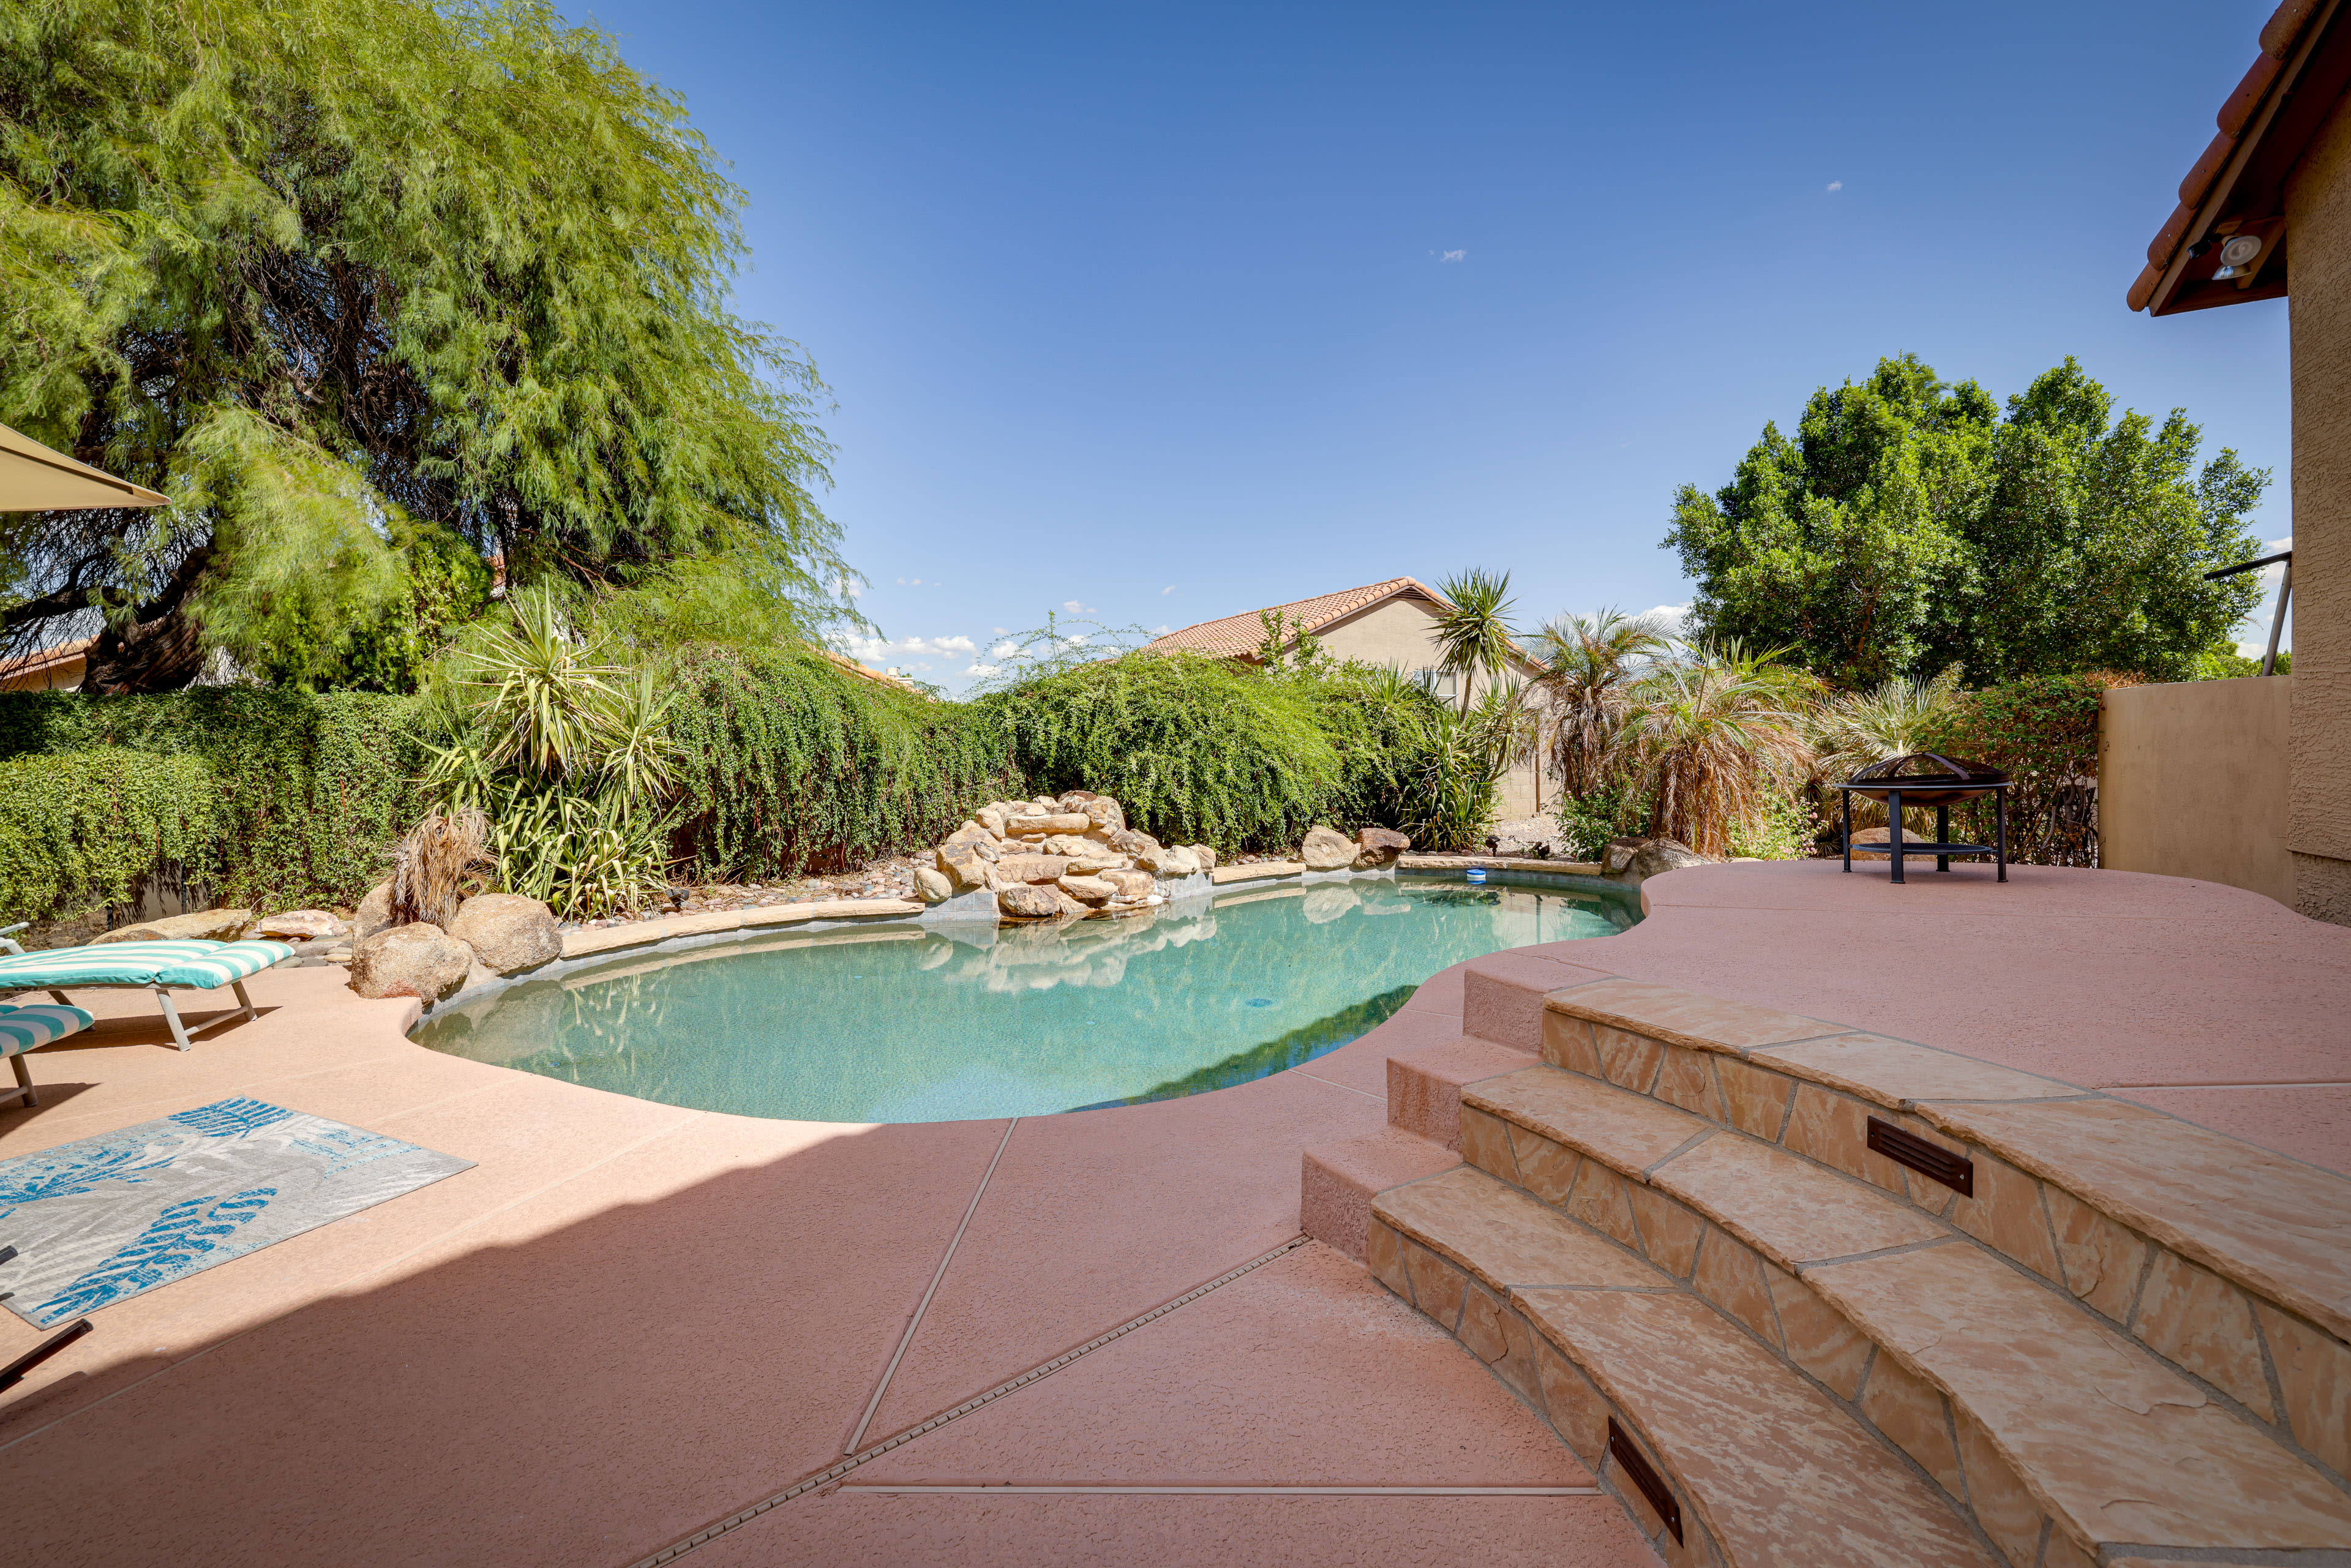 Private Pool | Self Check-In | 15 Mi to Downtown Phoenix